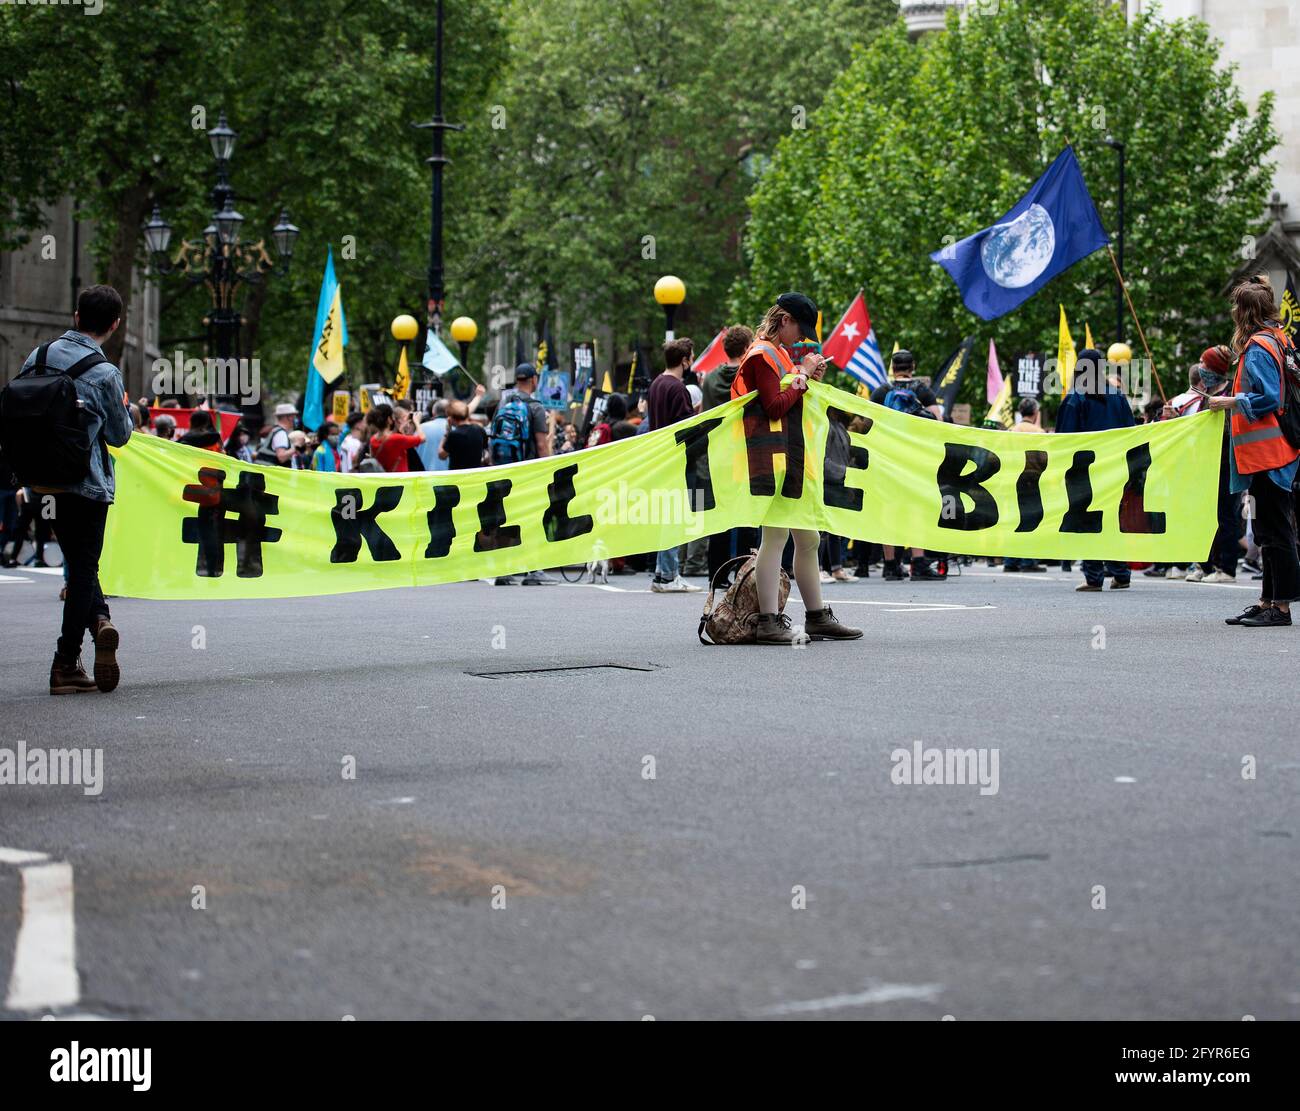 London, UK. 29th May, 2021. Protesters hold a banner during the Kill the Bill IV Protest in London to condemn a proposed bill that will give police and the Home Secretary increased power to stop protests.The rallies are being held against the Police, Crime, Sentencing and Courts Bill. Credit: SOPA Images Limited/Alamy Live News Stock Photo